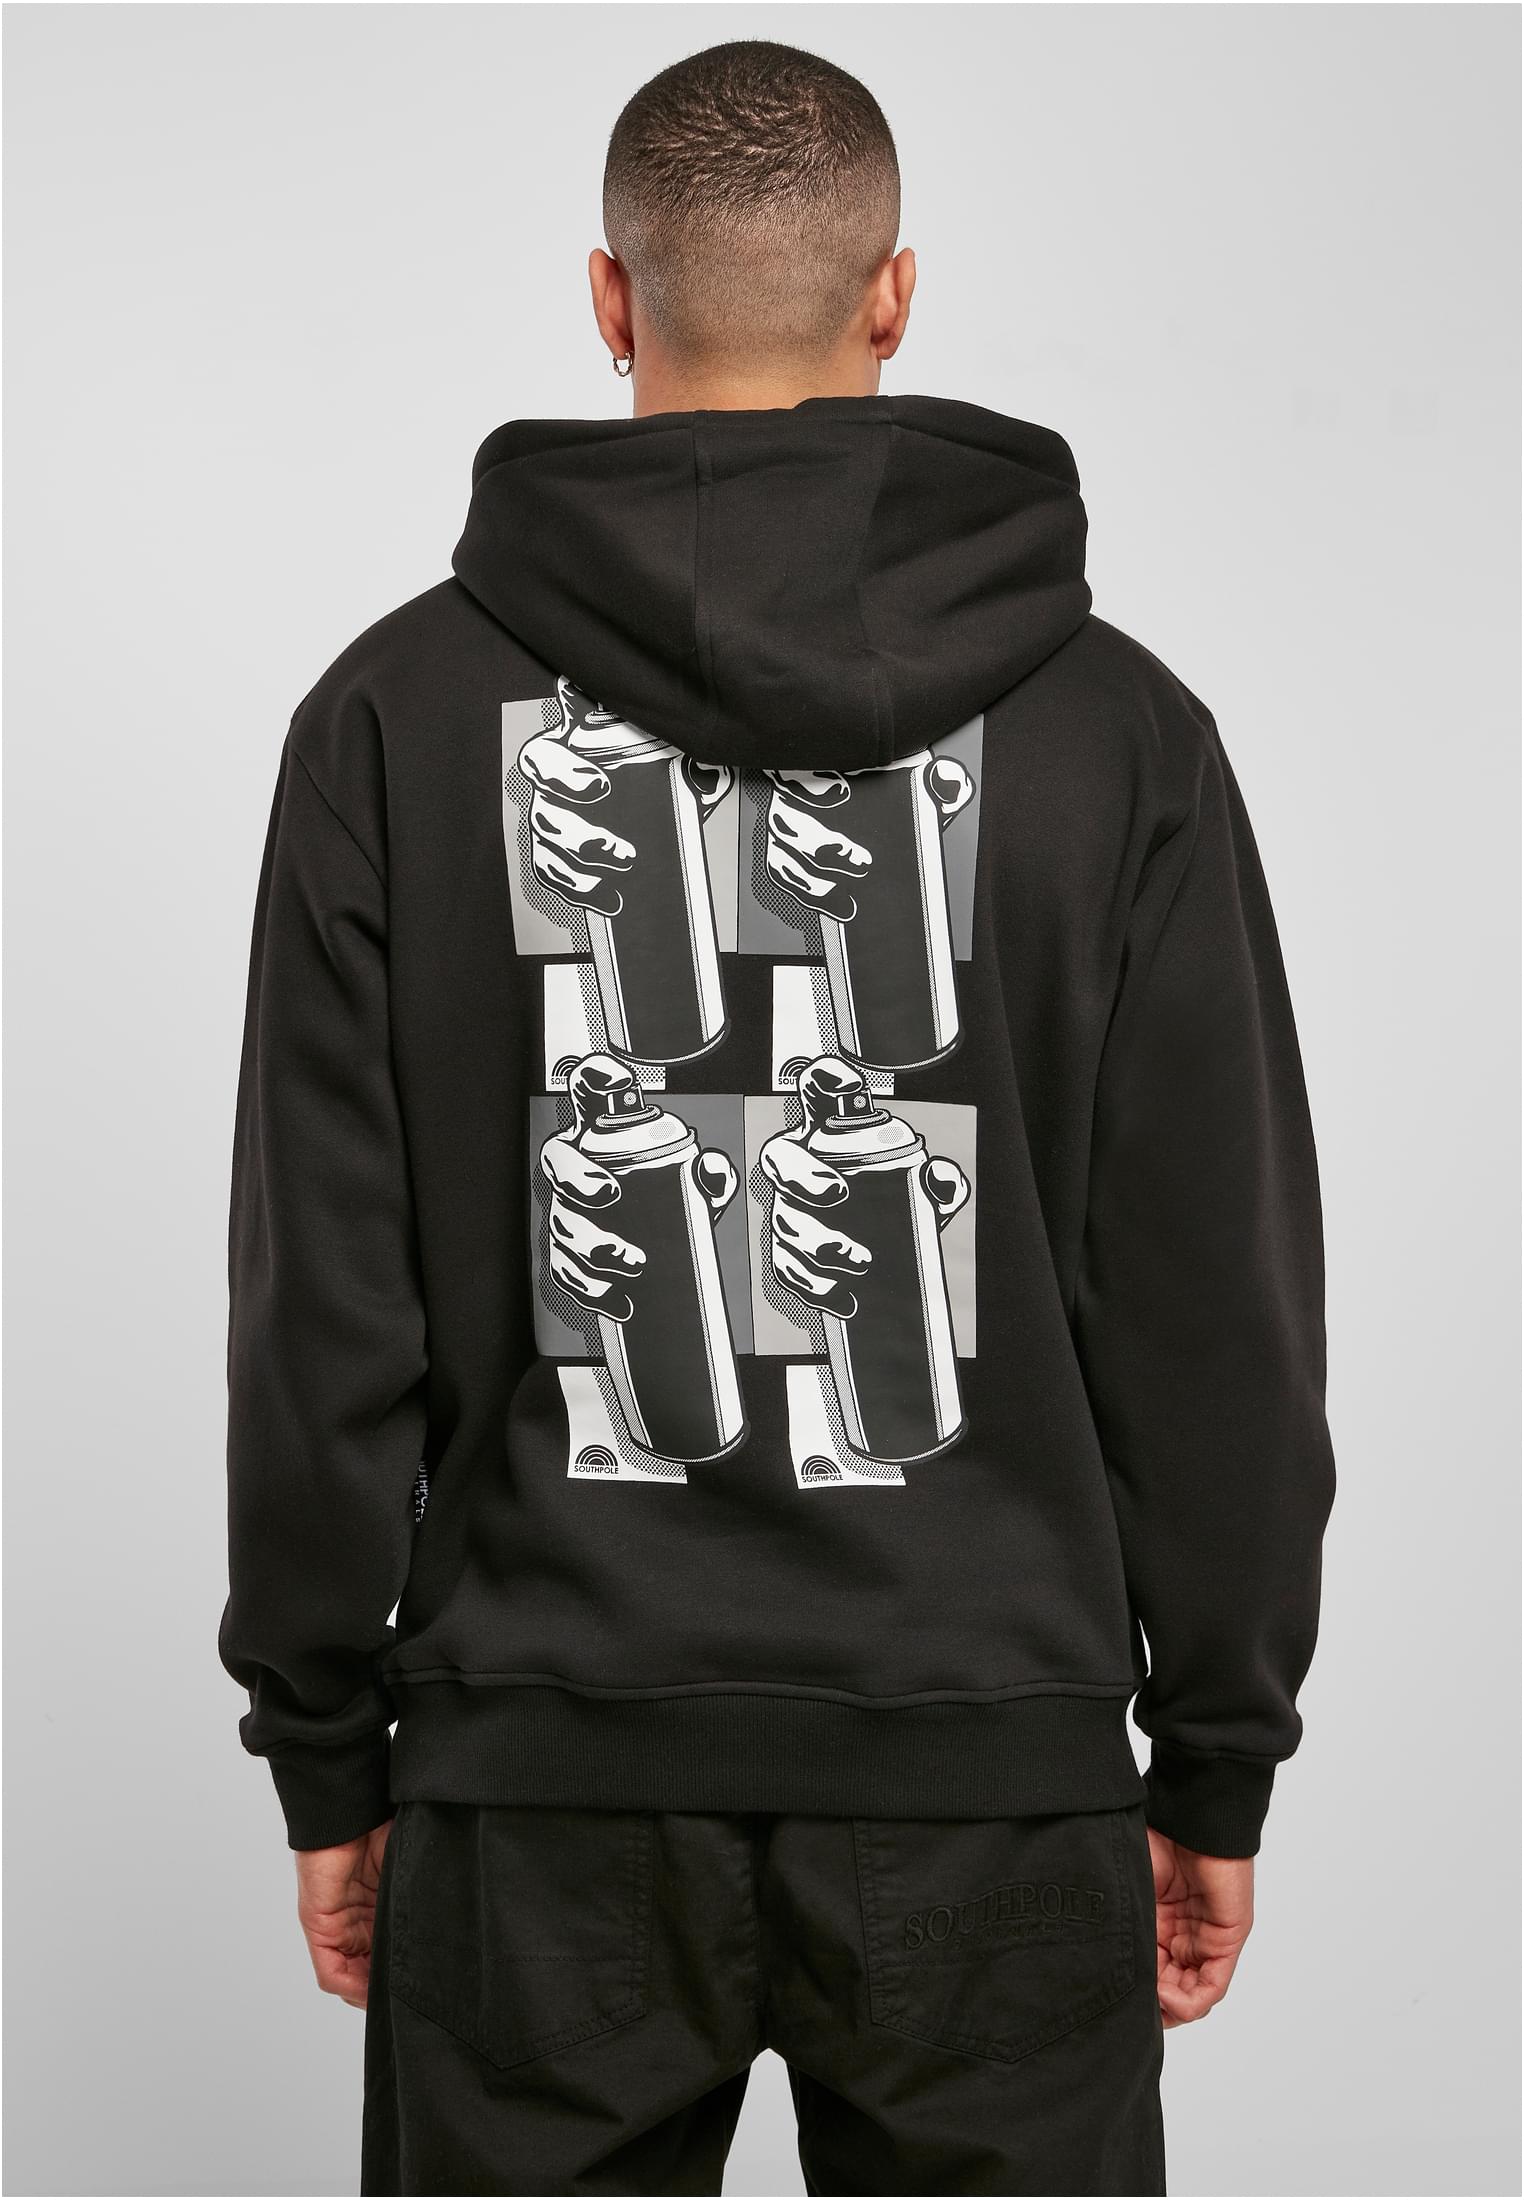 Southpole Southpole Old School Spray Can Hoody in Farbe black